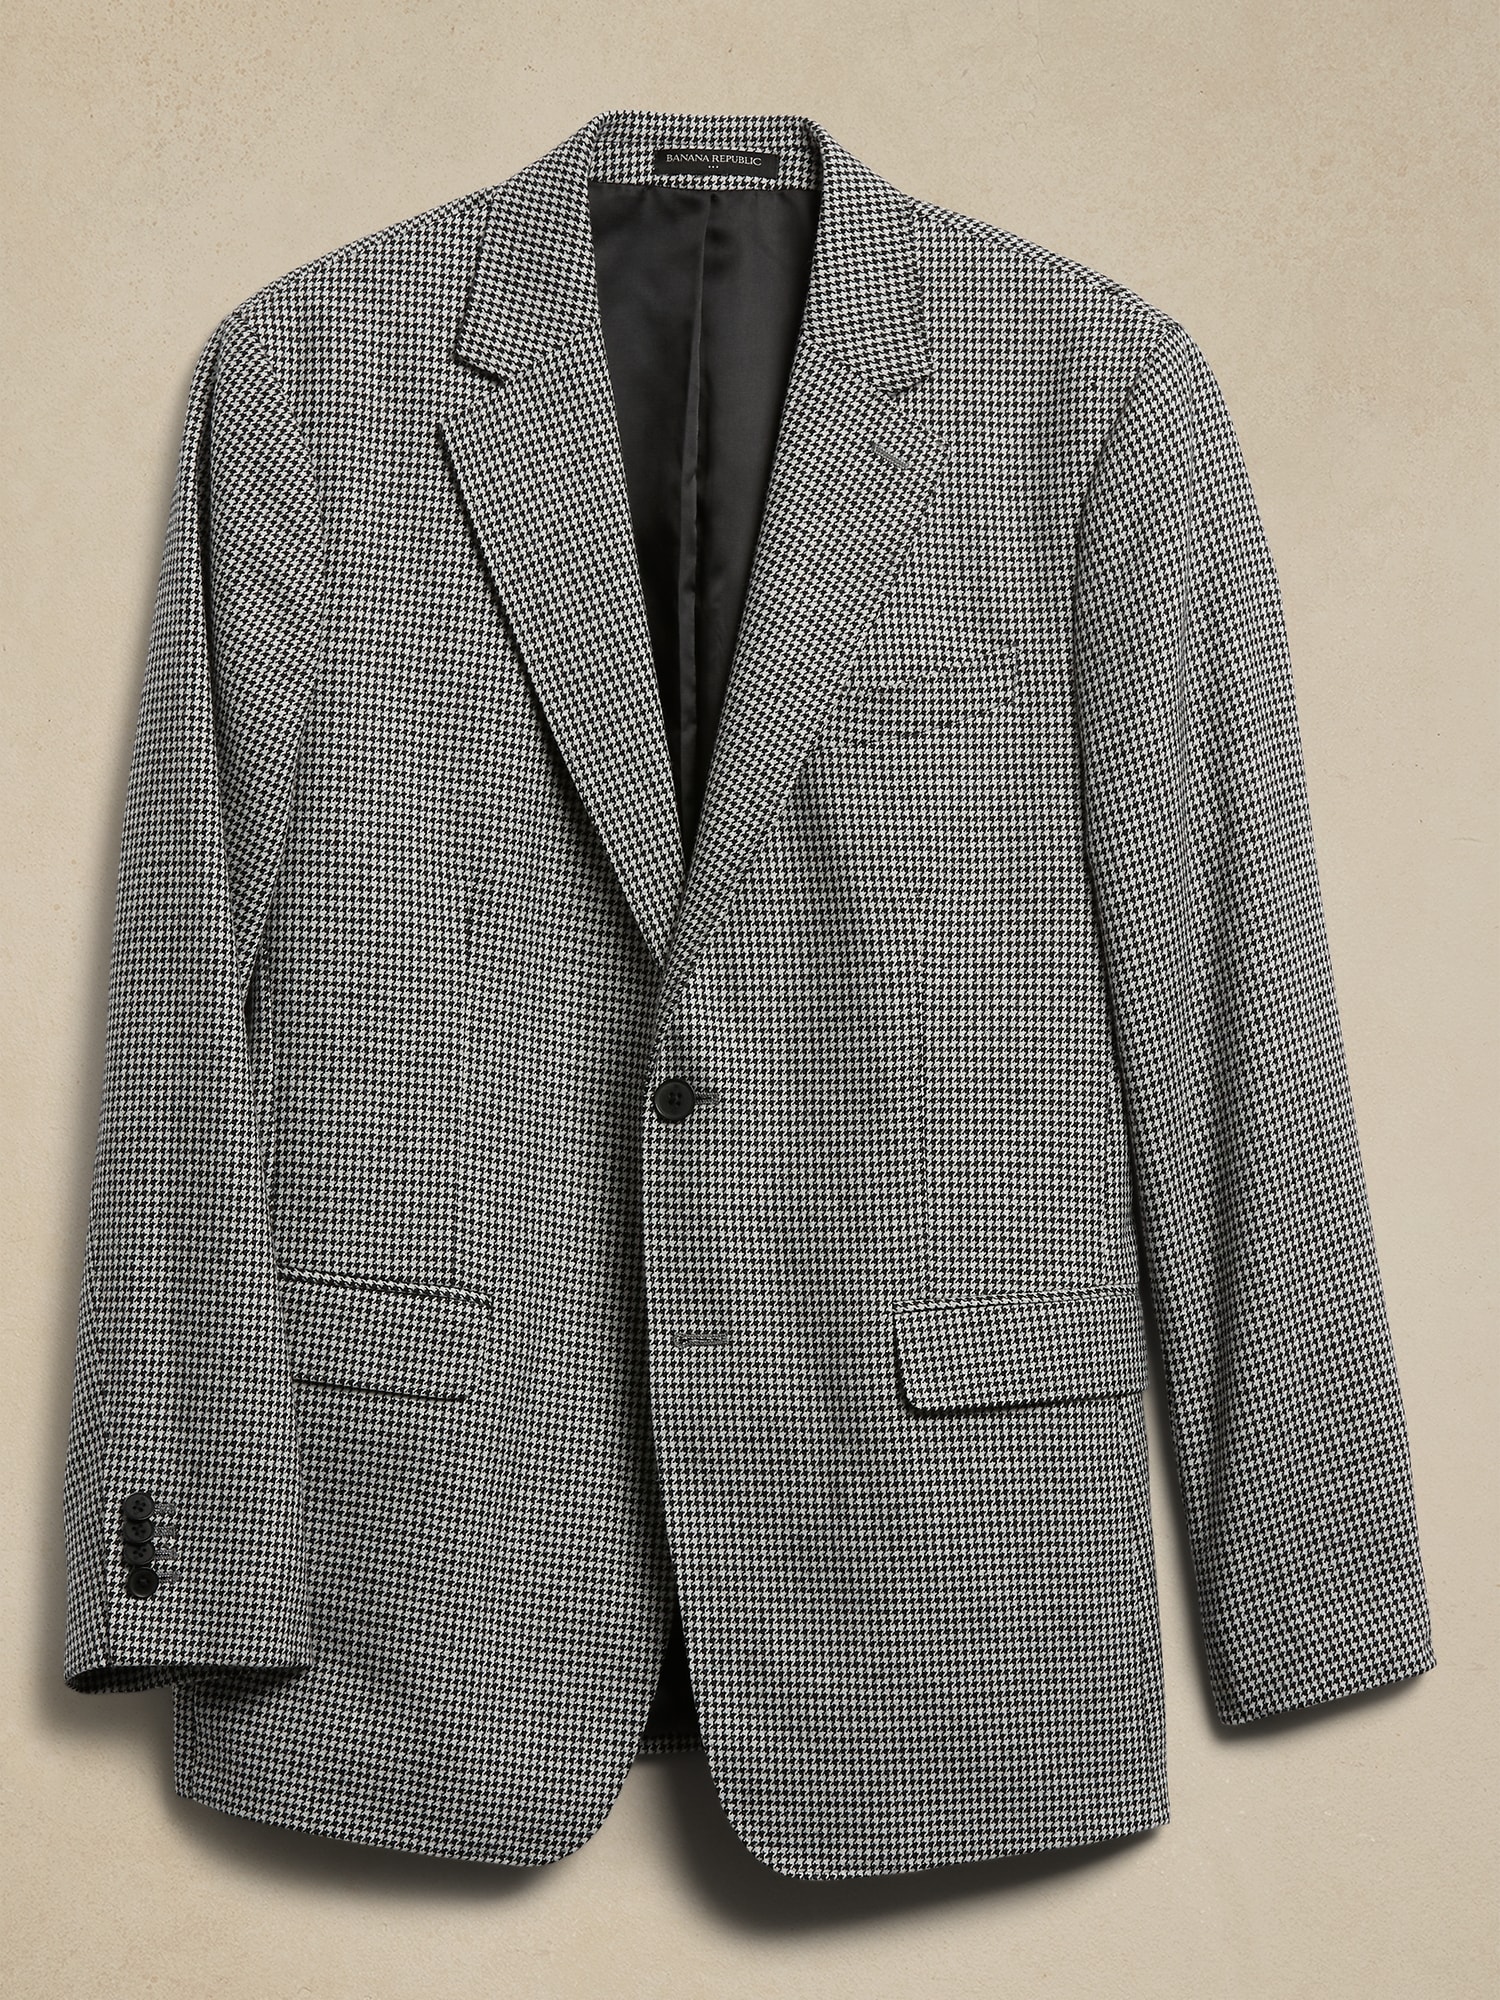 Tailored-Fit Houndstooth Suit Jacket